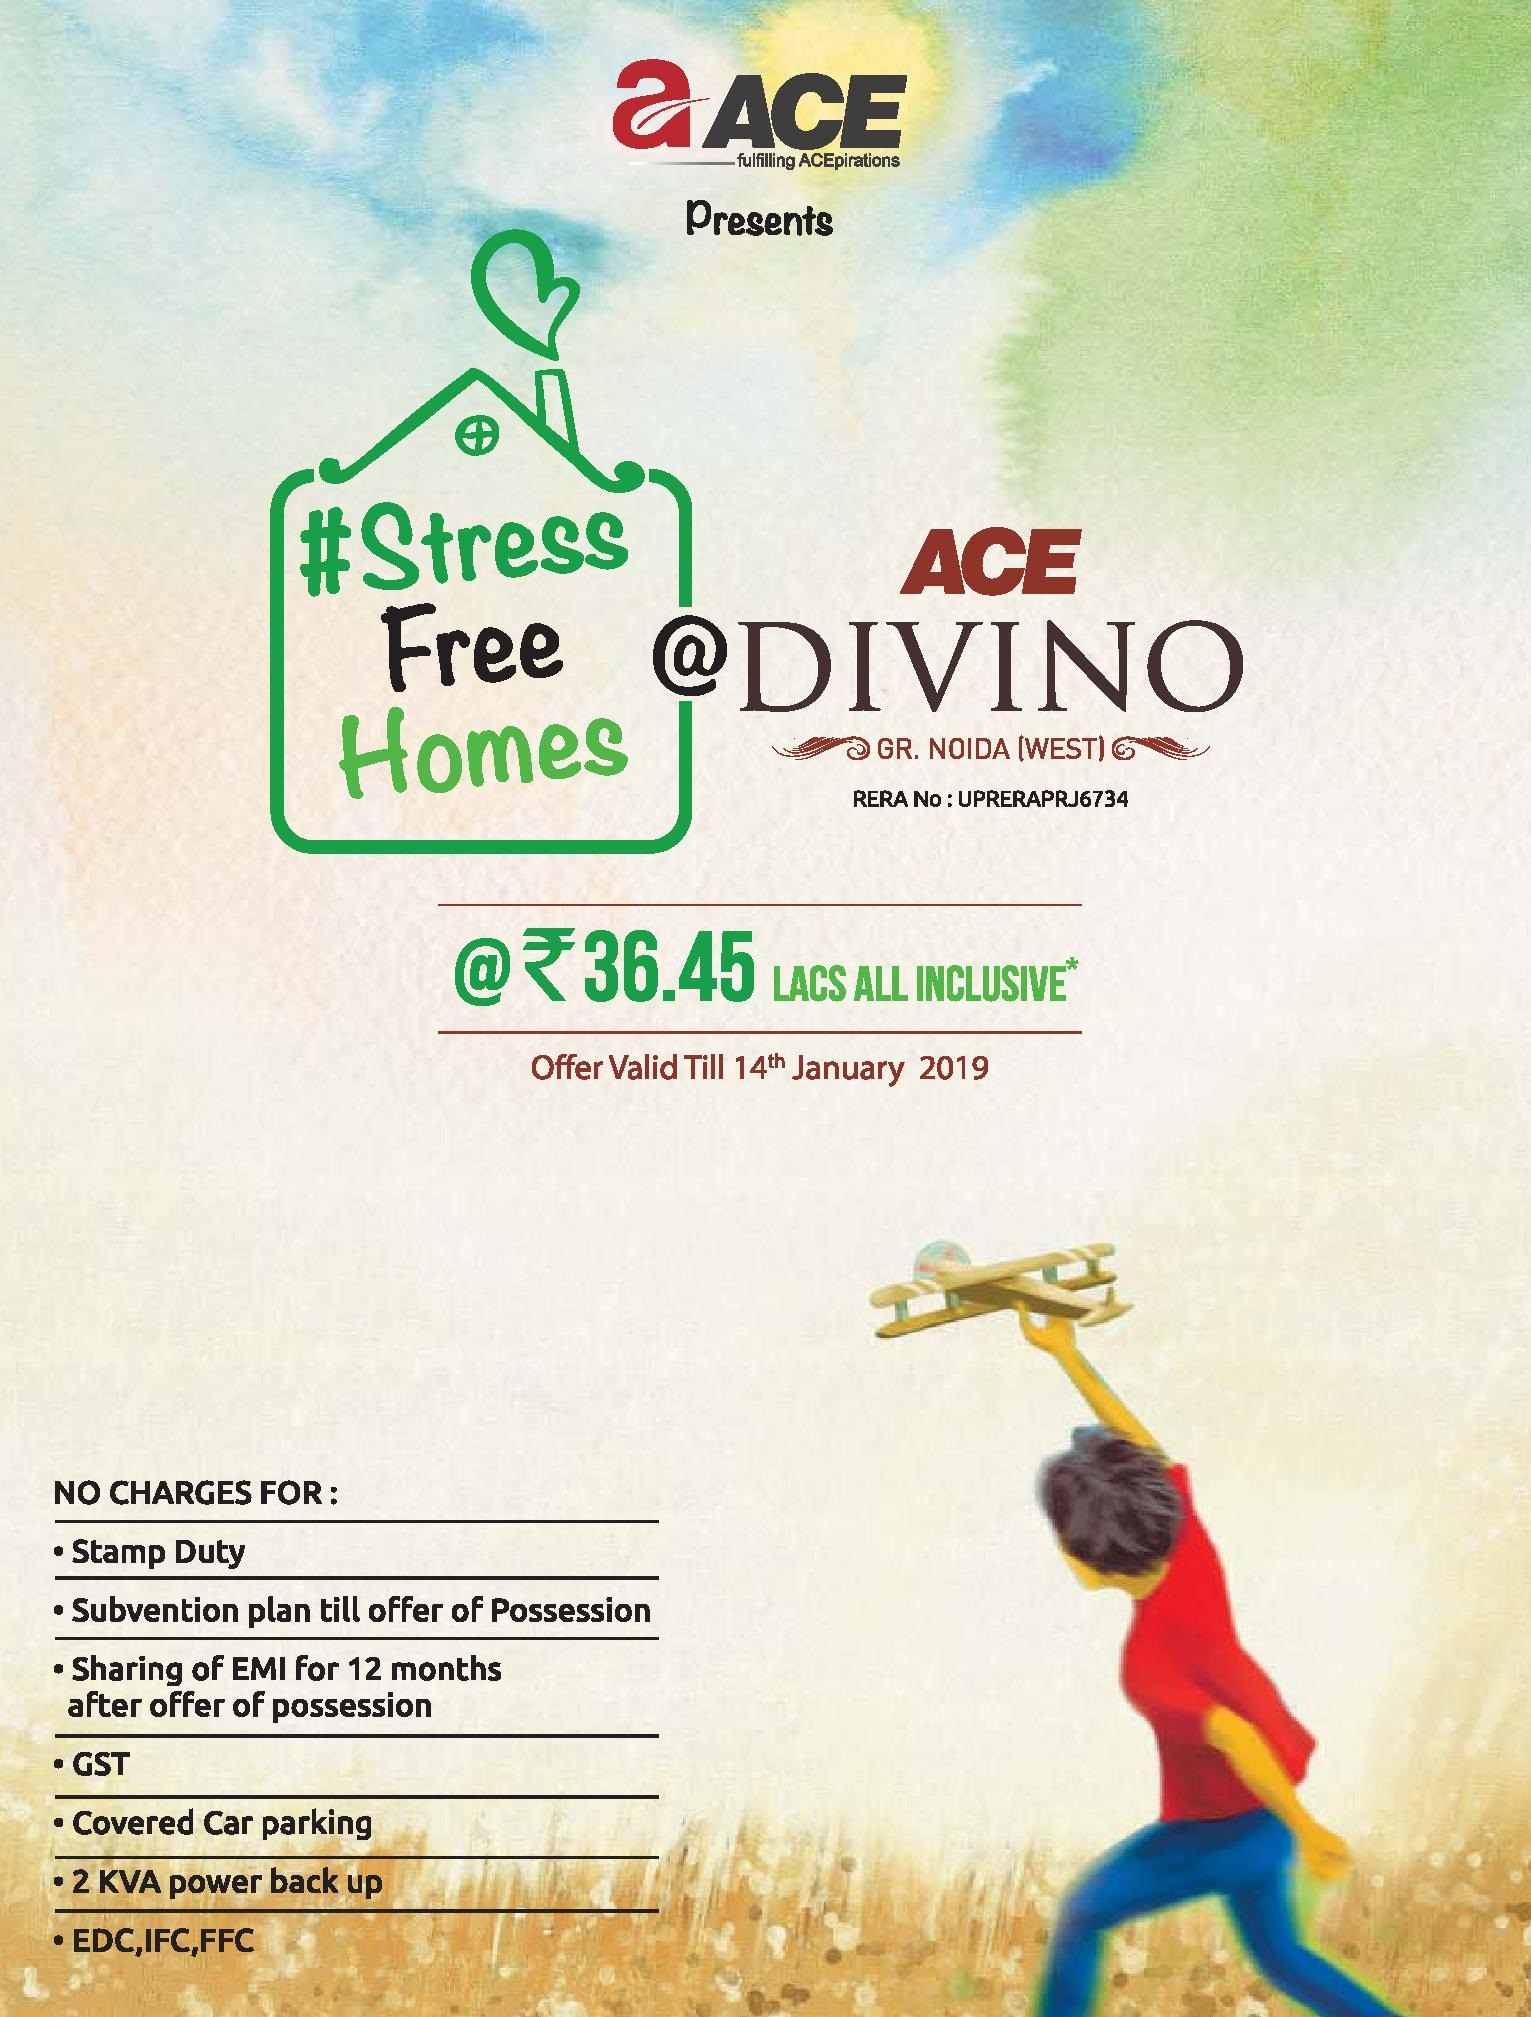 Book home @ Rs 36.45 Lacs at Ace Divino in Noida Update